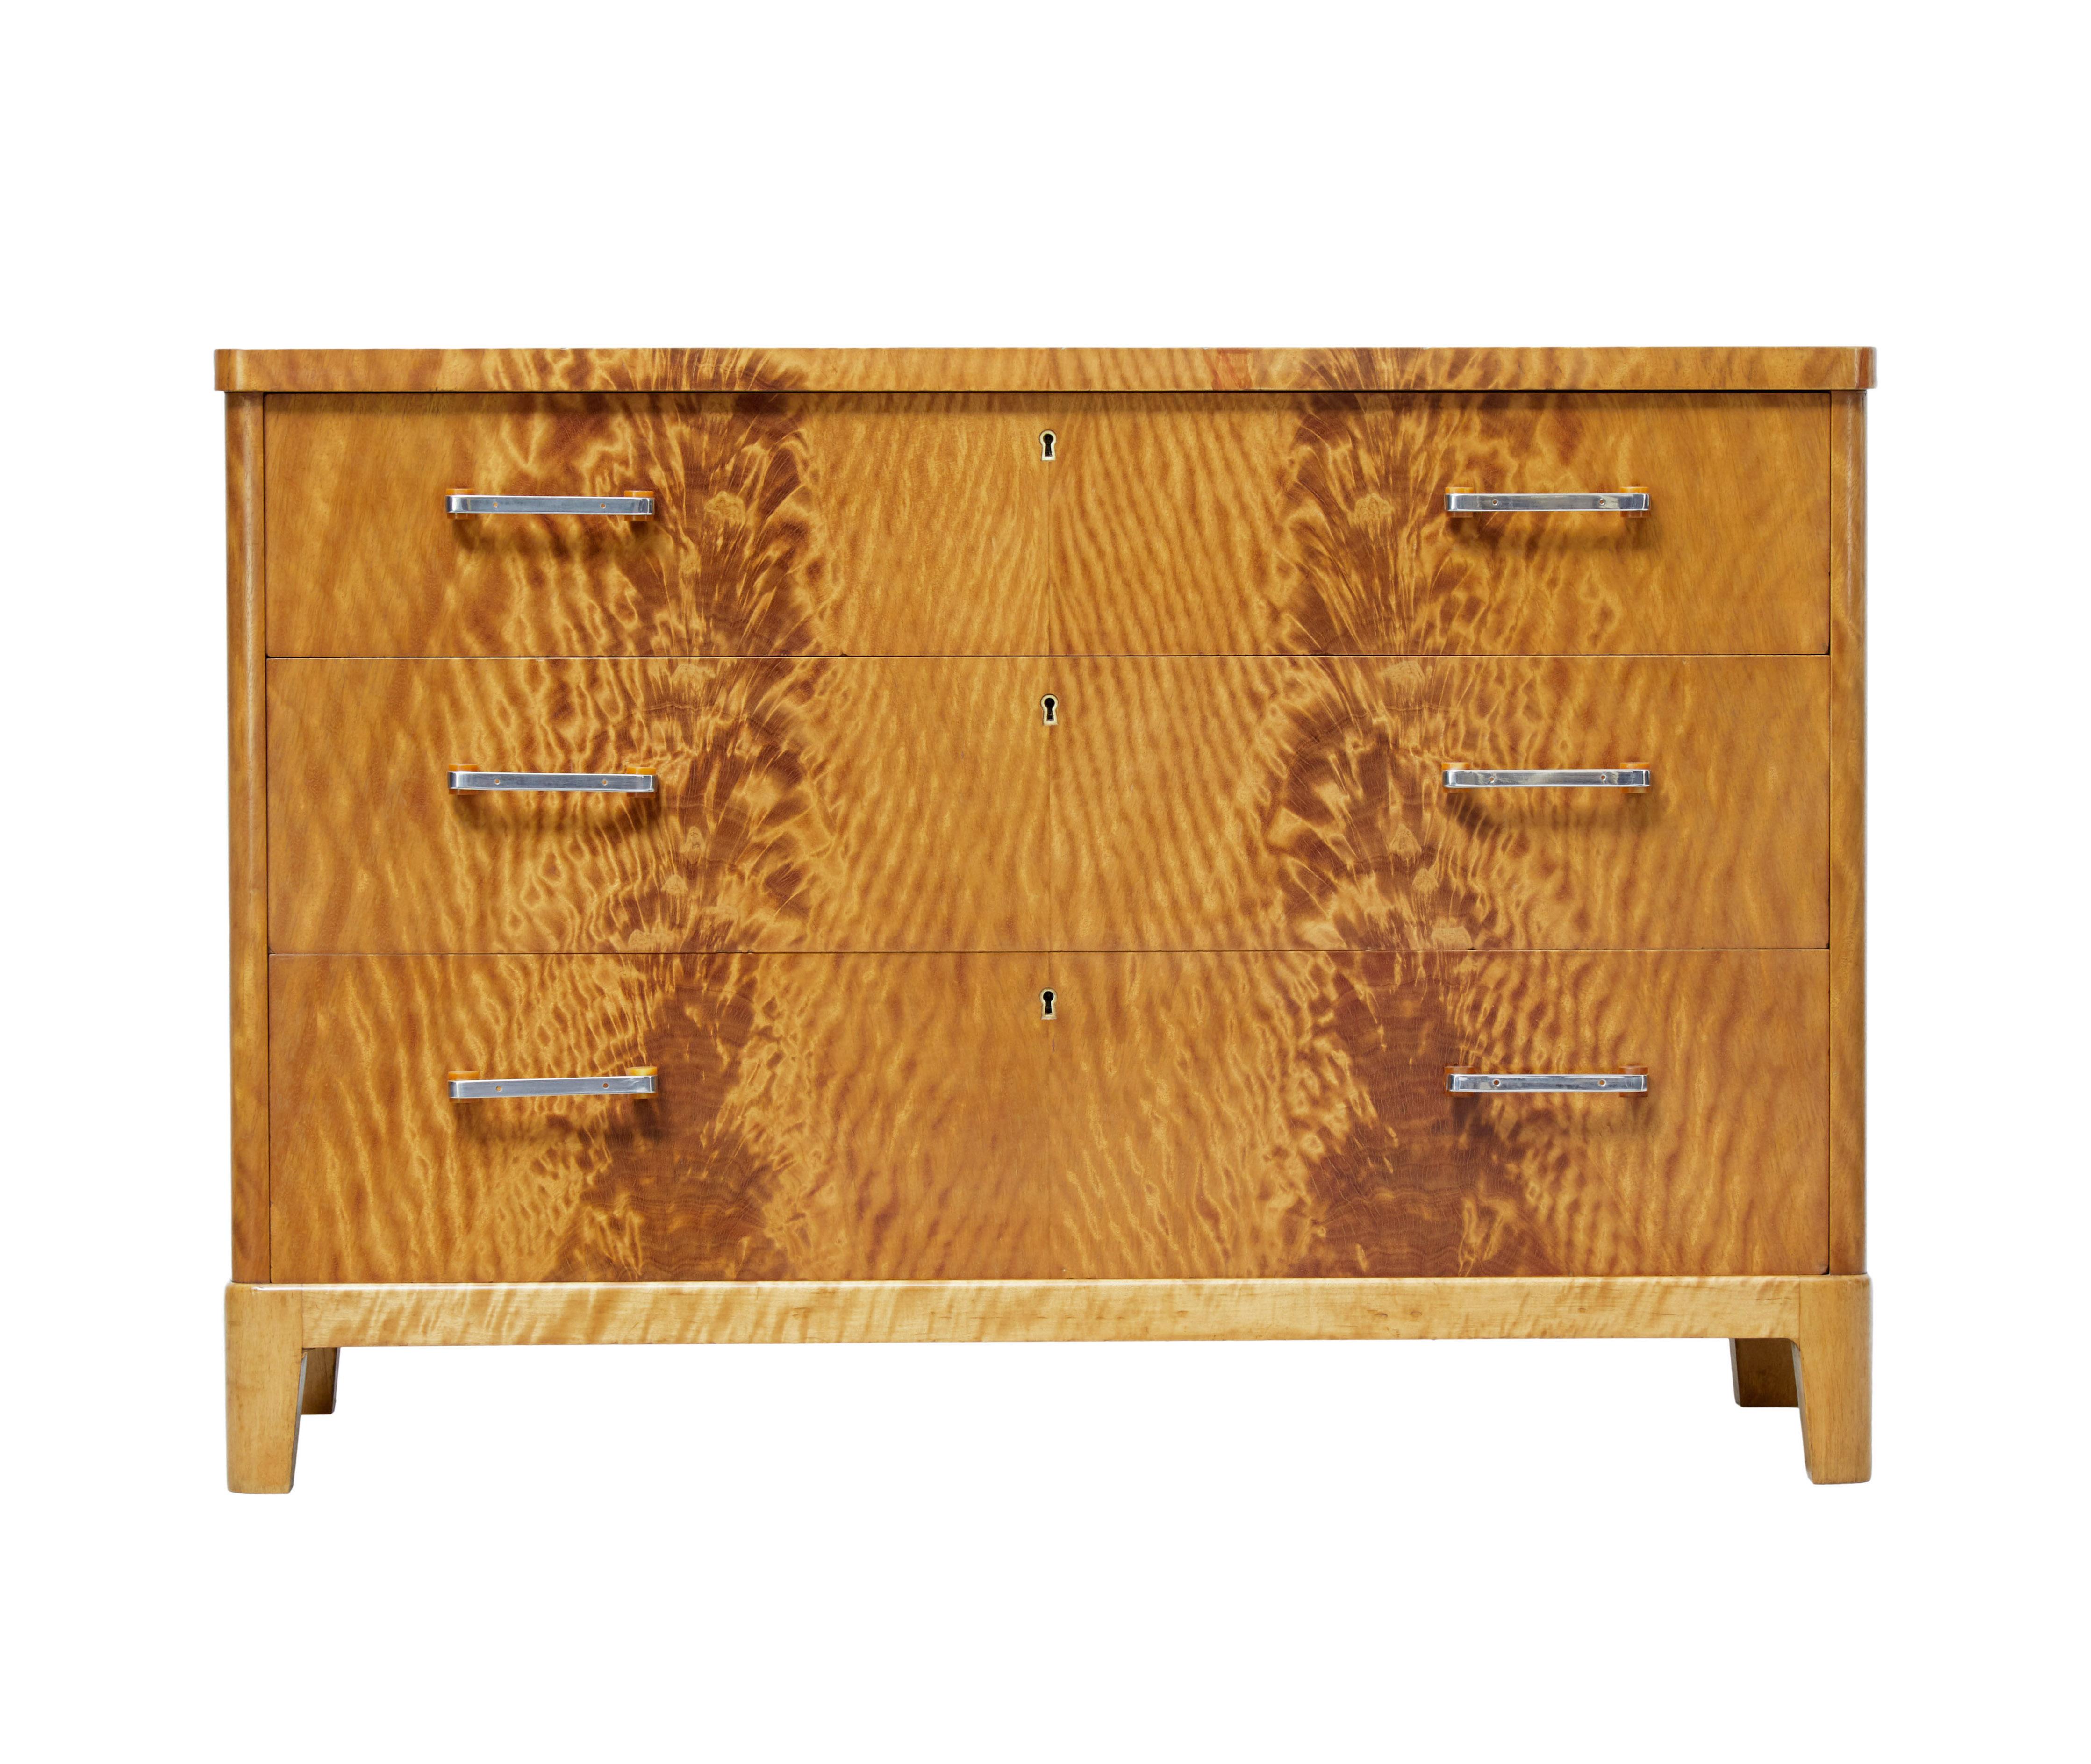 Mid 20th century fine burr birch Scandinavian modern chest of drawers circa 1950.

Possibly early than 1950 this deco inspired chest features striking veneers. 3 graduating drawers to the front, fitted with bakelite and steel handles. Oak lined